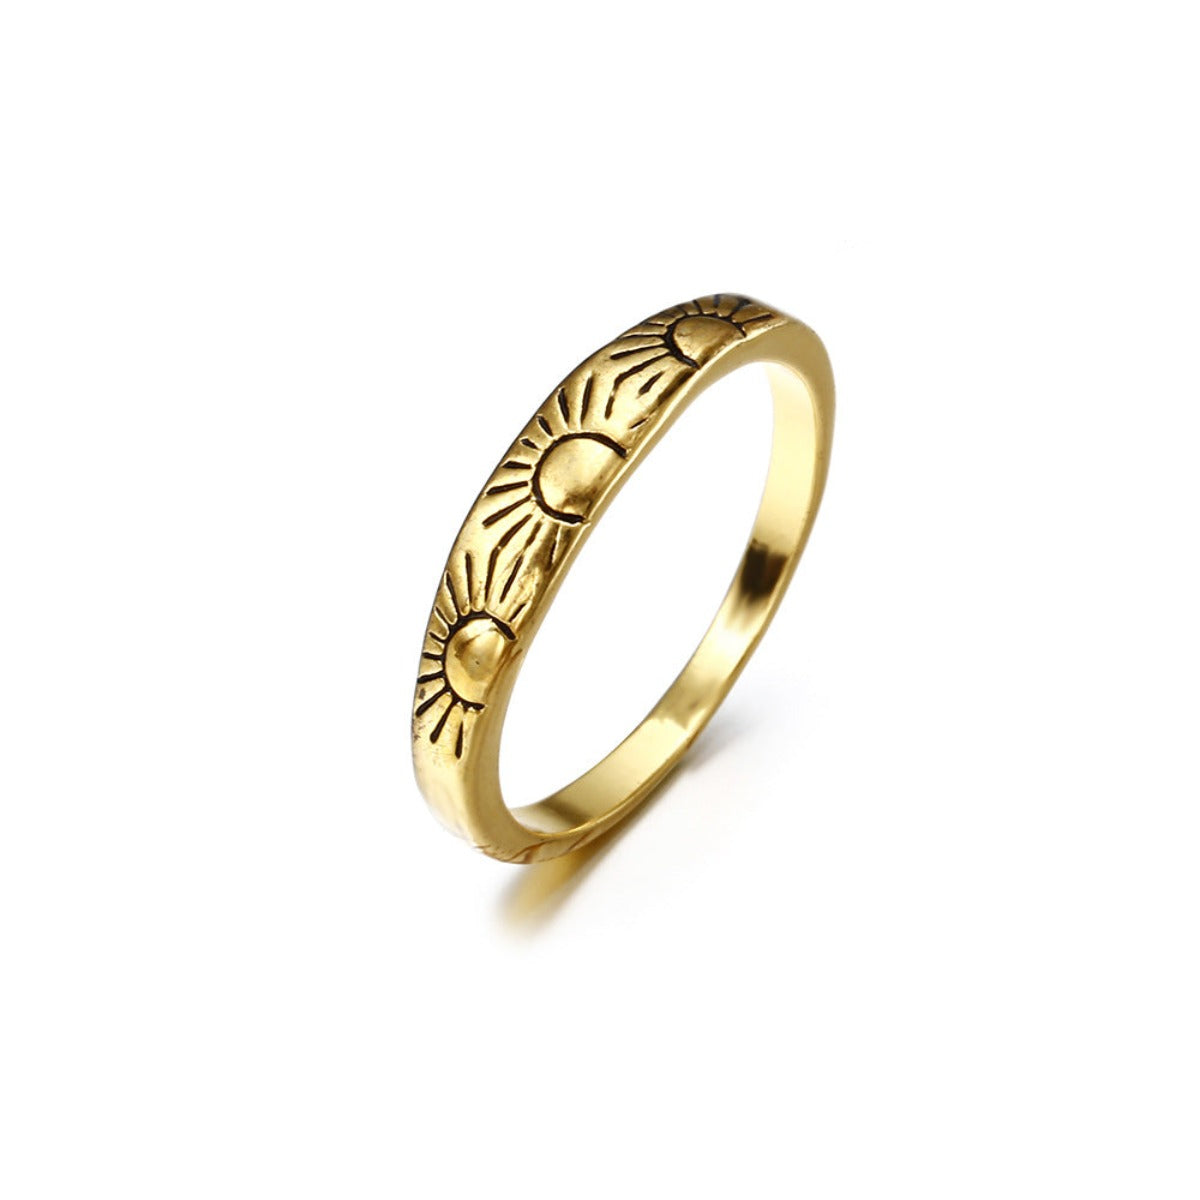 Zinc Alloy, Gold Plated 14K Gold Small Sun Lady Engagement Ring - Afro Fashion Hive